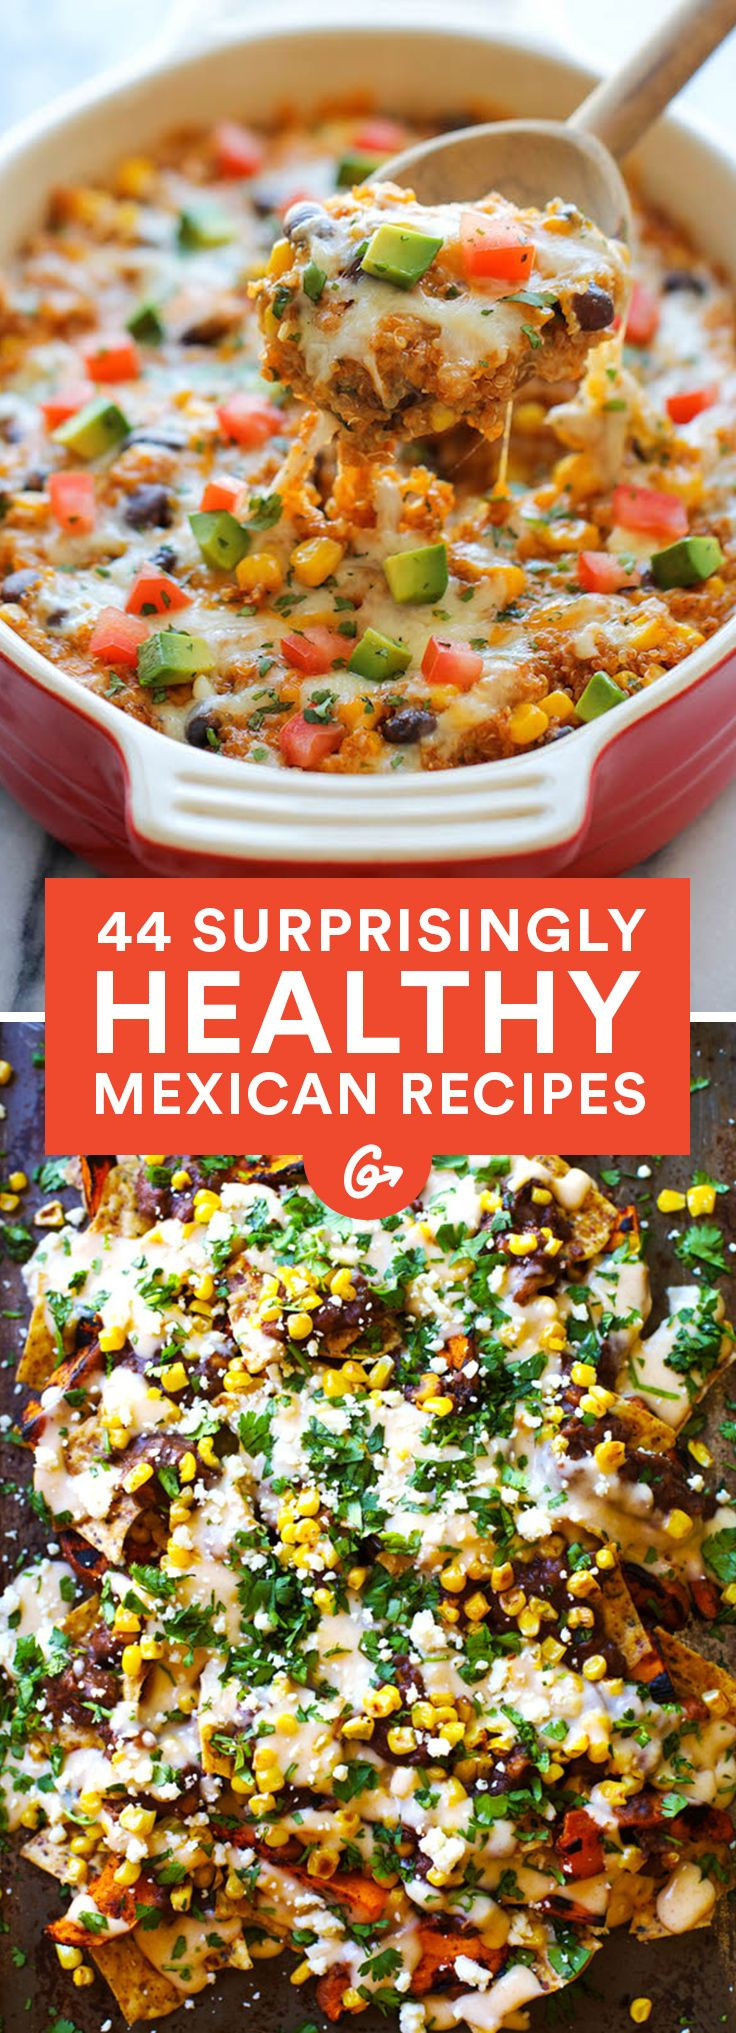 Healthy Mexican Recipes
 Best 25 Mexican meals ideas on Pinterest